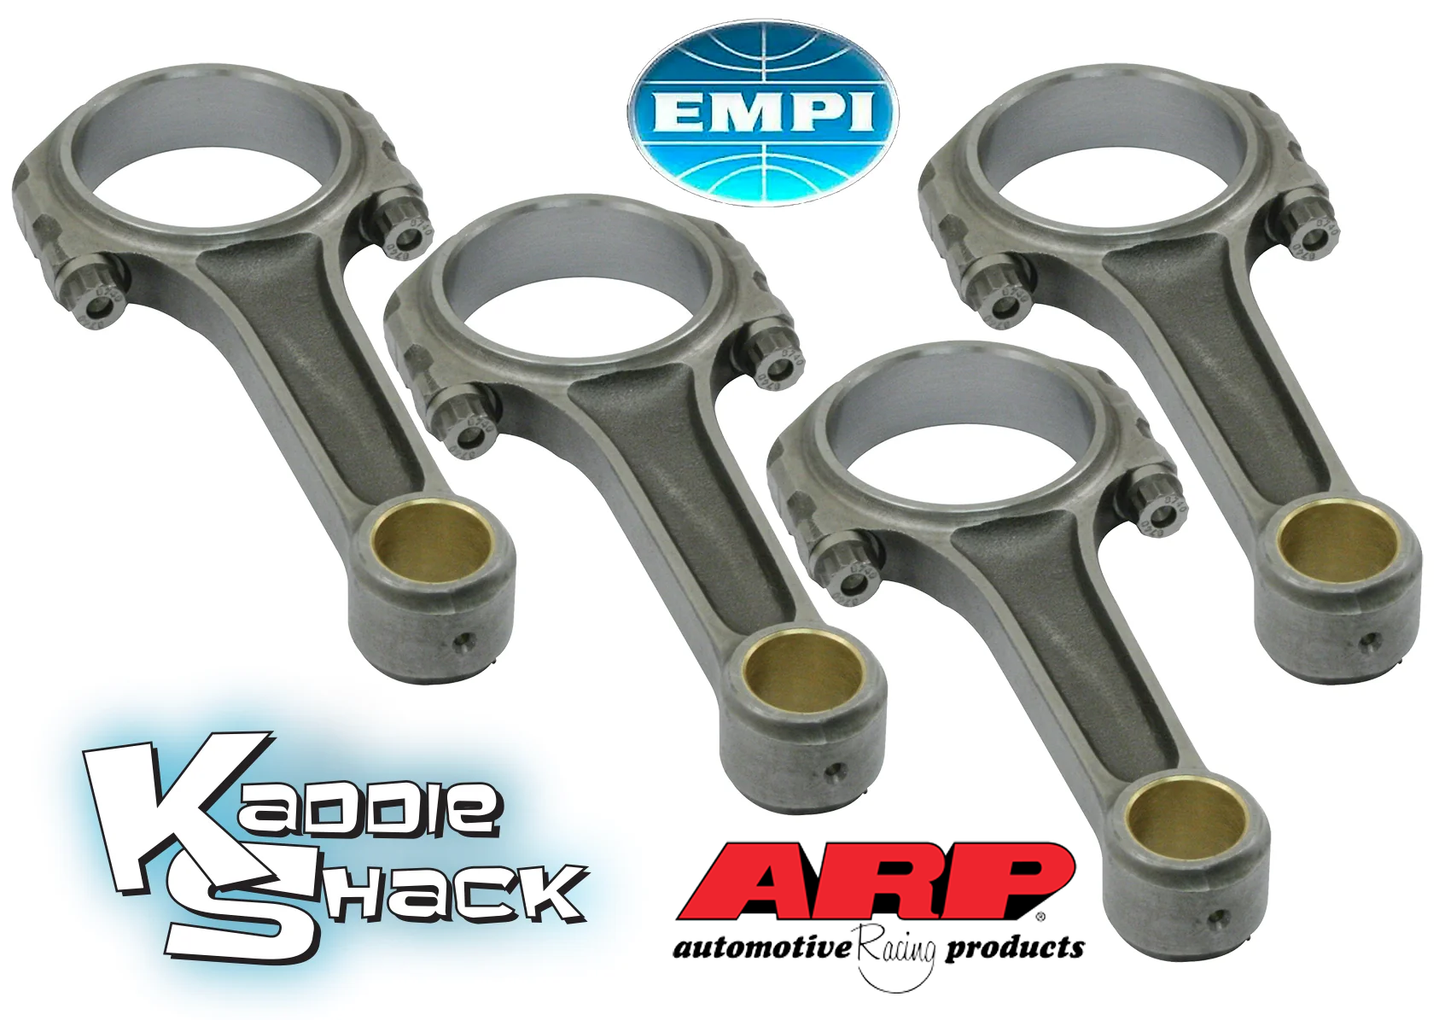 EMPI Forged Chromoly I-Beam Connecting Rods, VW Journal, 5.394", ARP 8740 Rod Bolts